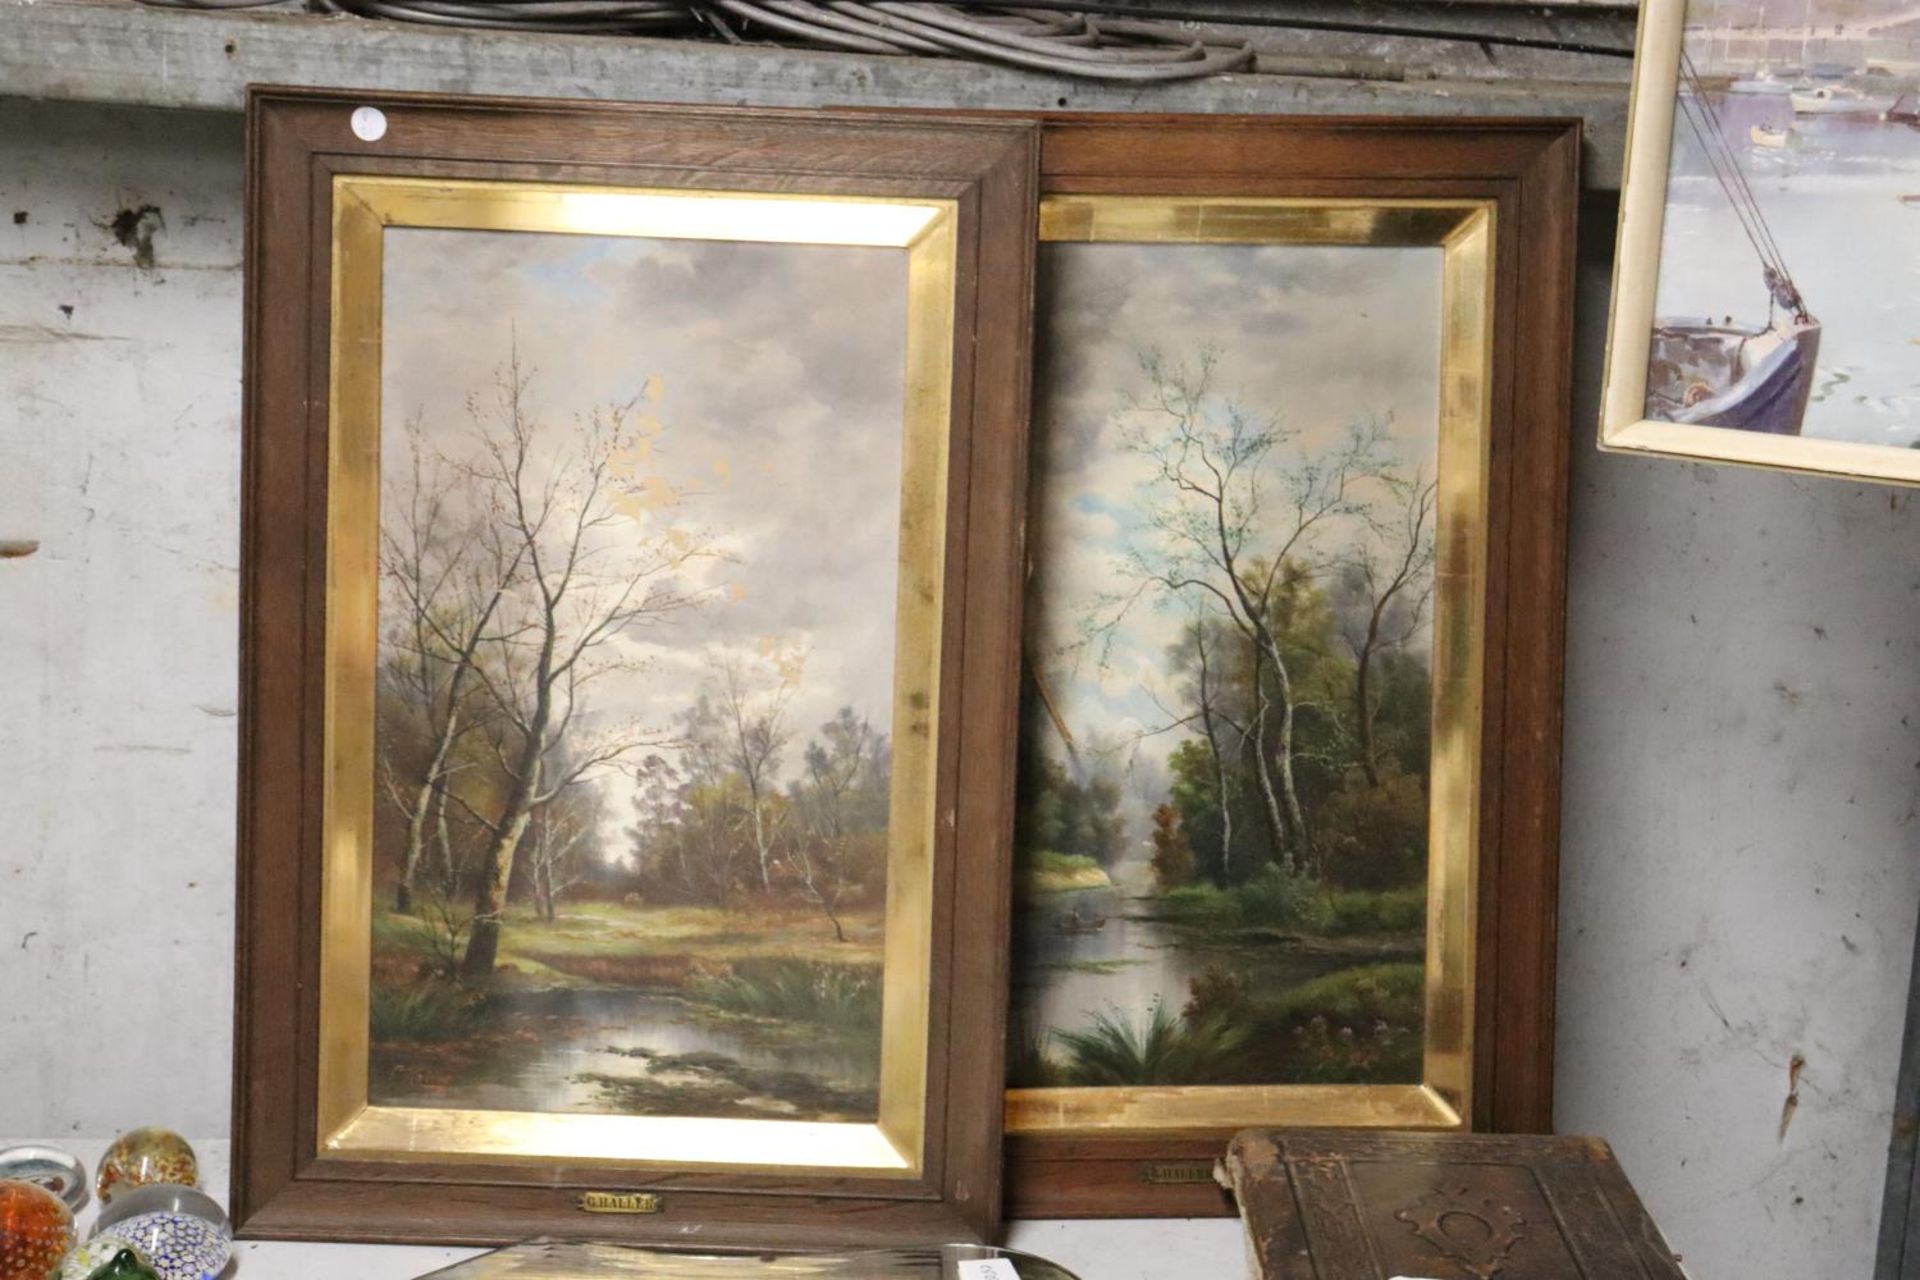 TWO FRAMED OILS ON CANVAS BY G HALLER OF RURAL SCENES